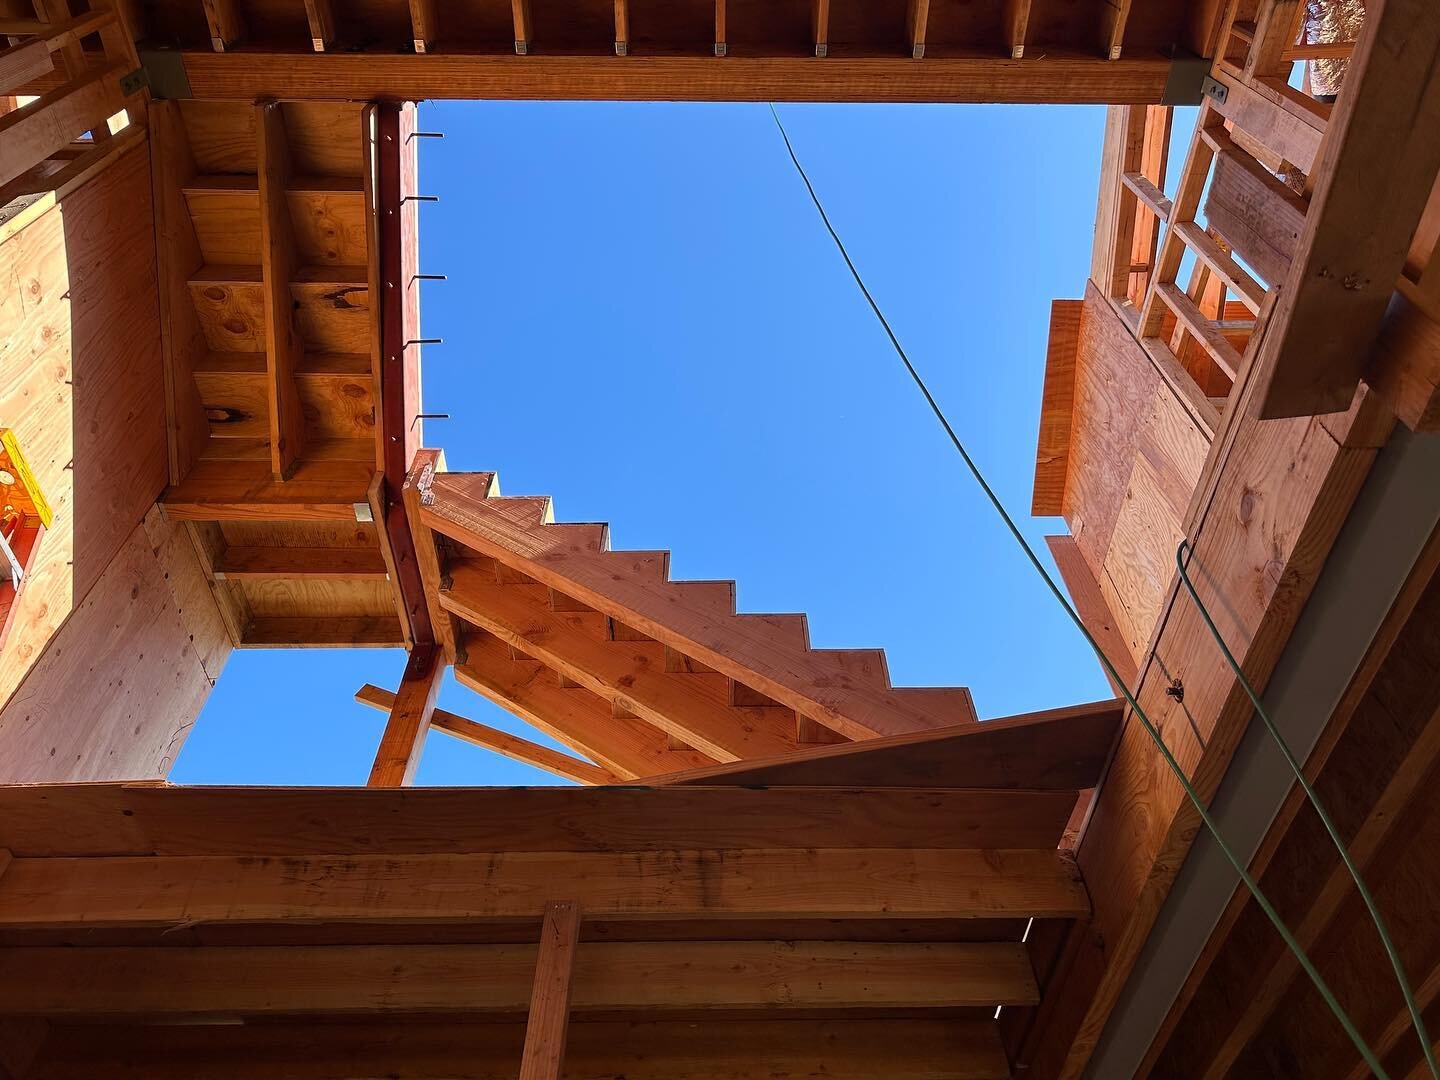 Stairway to heaven ✨ ✨ 
Looking up at the three-story atrium in our Mar Vista House. Stairway to the roof deck is taking shape!
.
.
.
.
.
#appelarchitecture #design #stair #architecture #wip #marvista #socal #la #losangeles #modernarchitecture #roofd